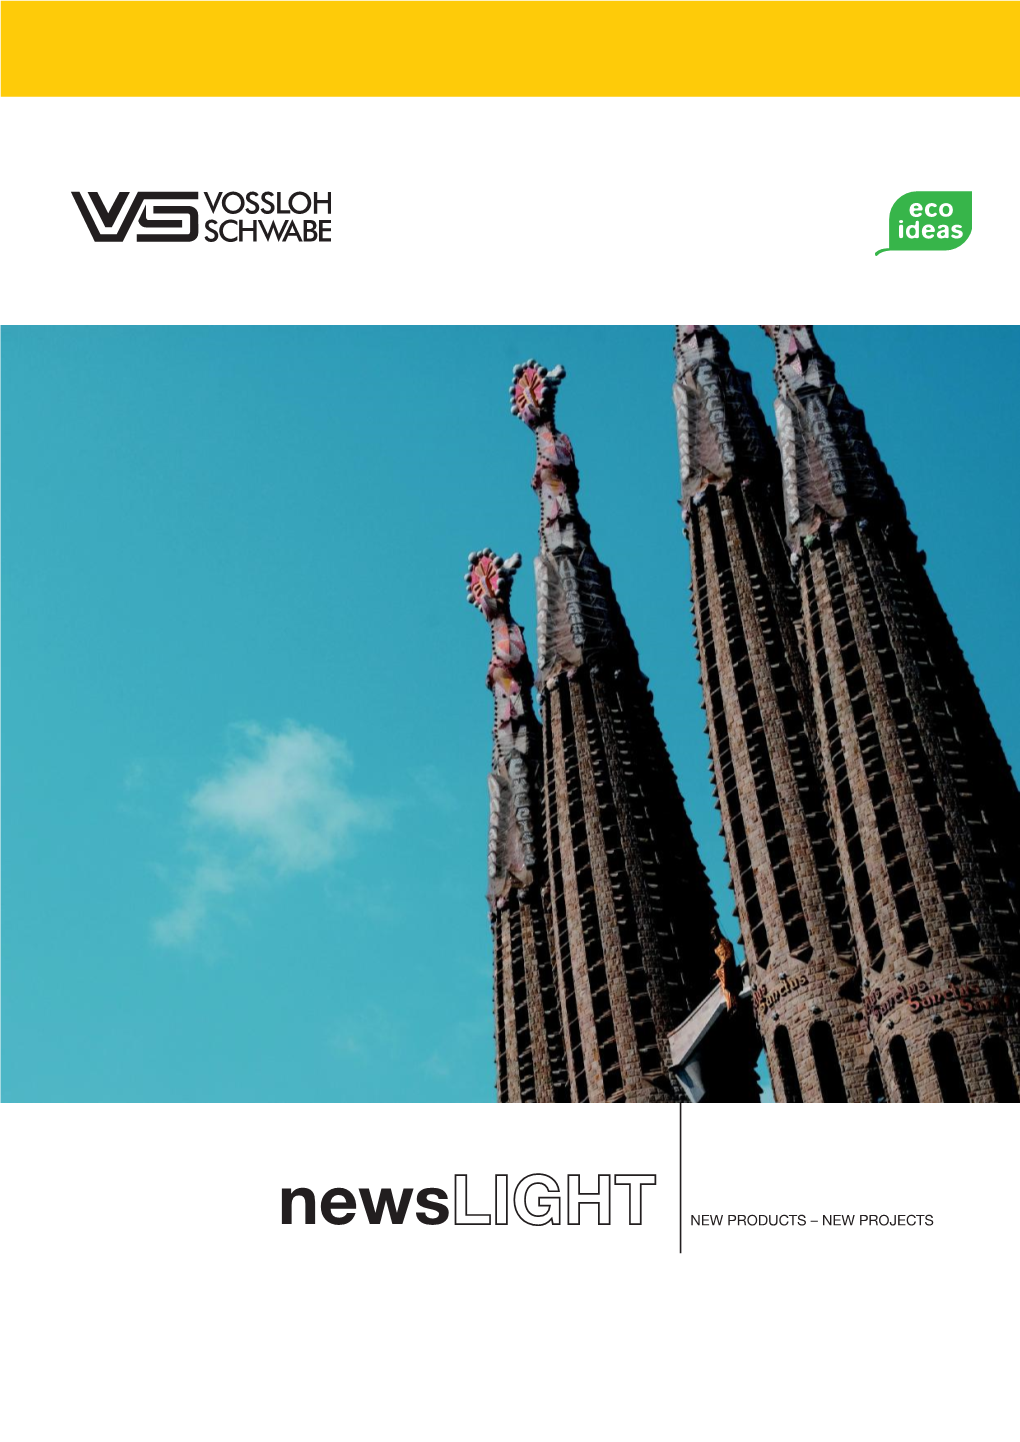 NEW PRODUCTS – NEW PROJECTS Newslight EDITORIAL